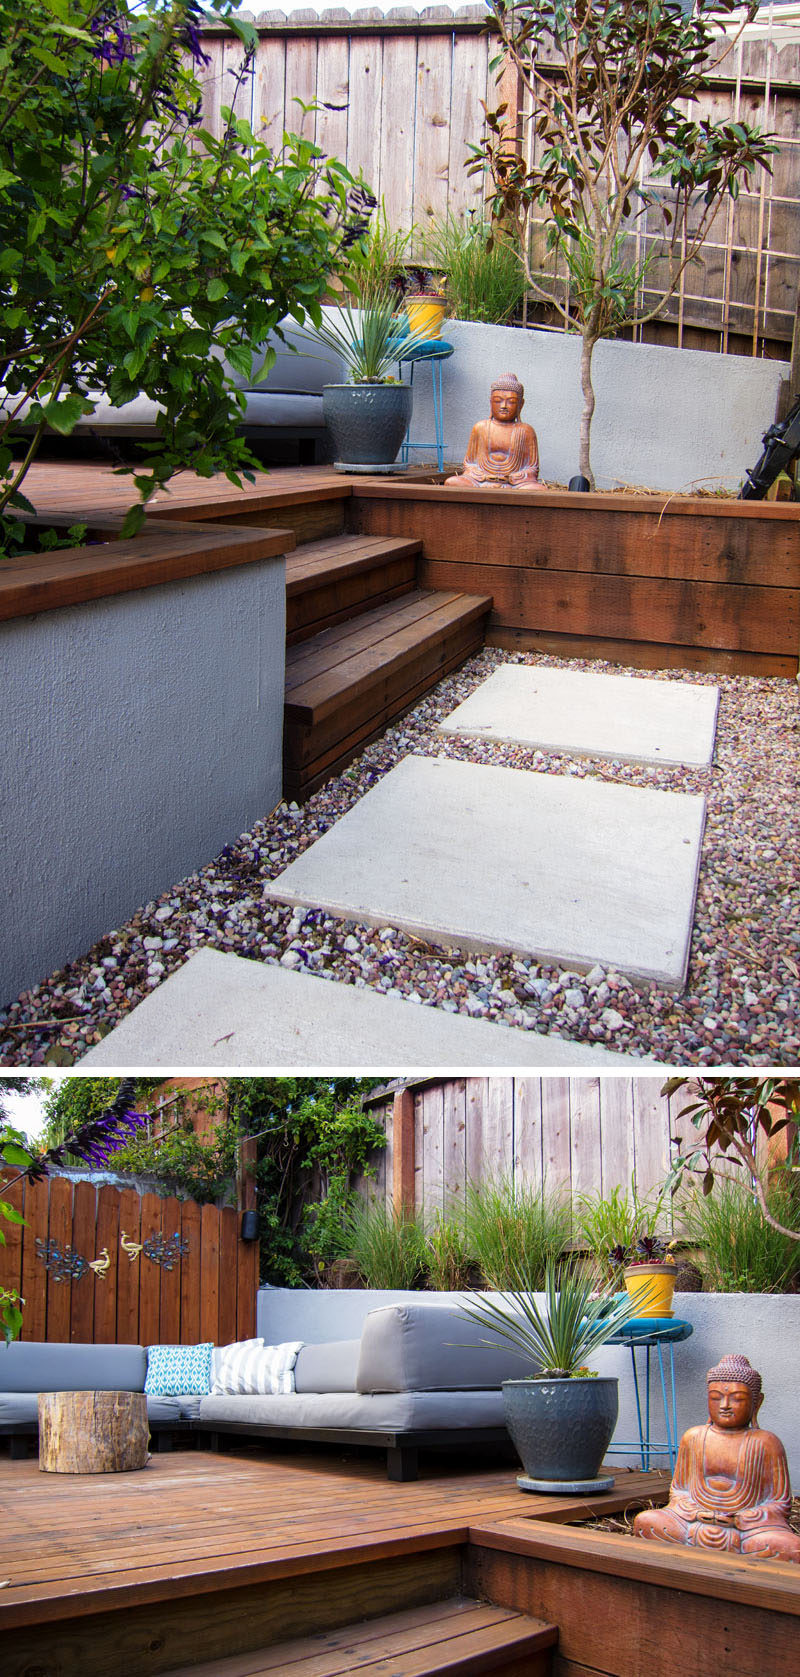 This modern backyard has a small set of wood stairs that leads up to a raised deck with a lounge.